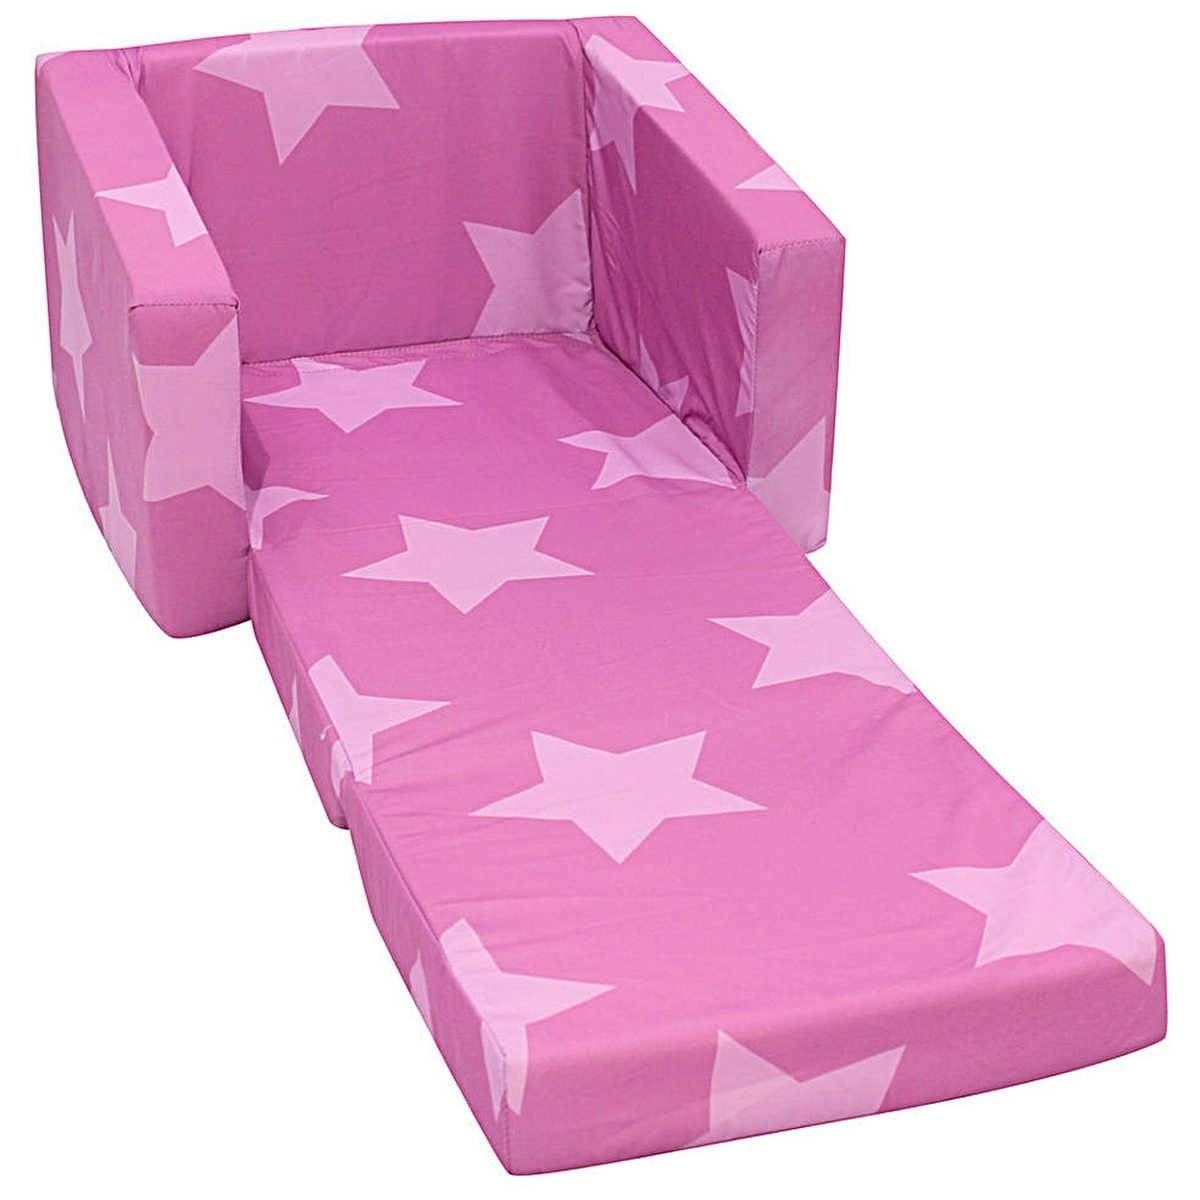 Nice Flip Out Chair #5: Pink Star Kids Single Flip Out Sofa | Home Within Flip Out Sofa For Kids (View 22 of 30)